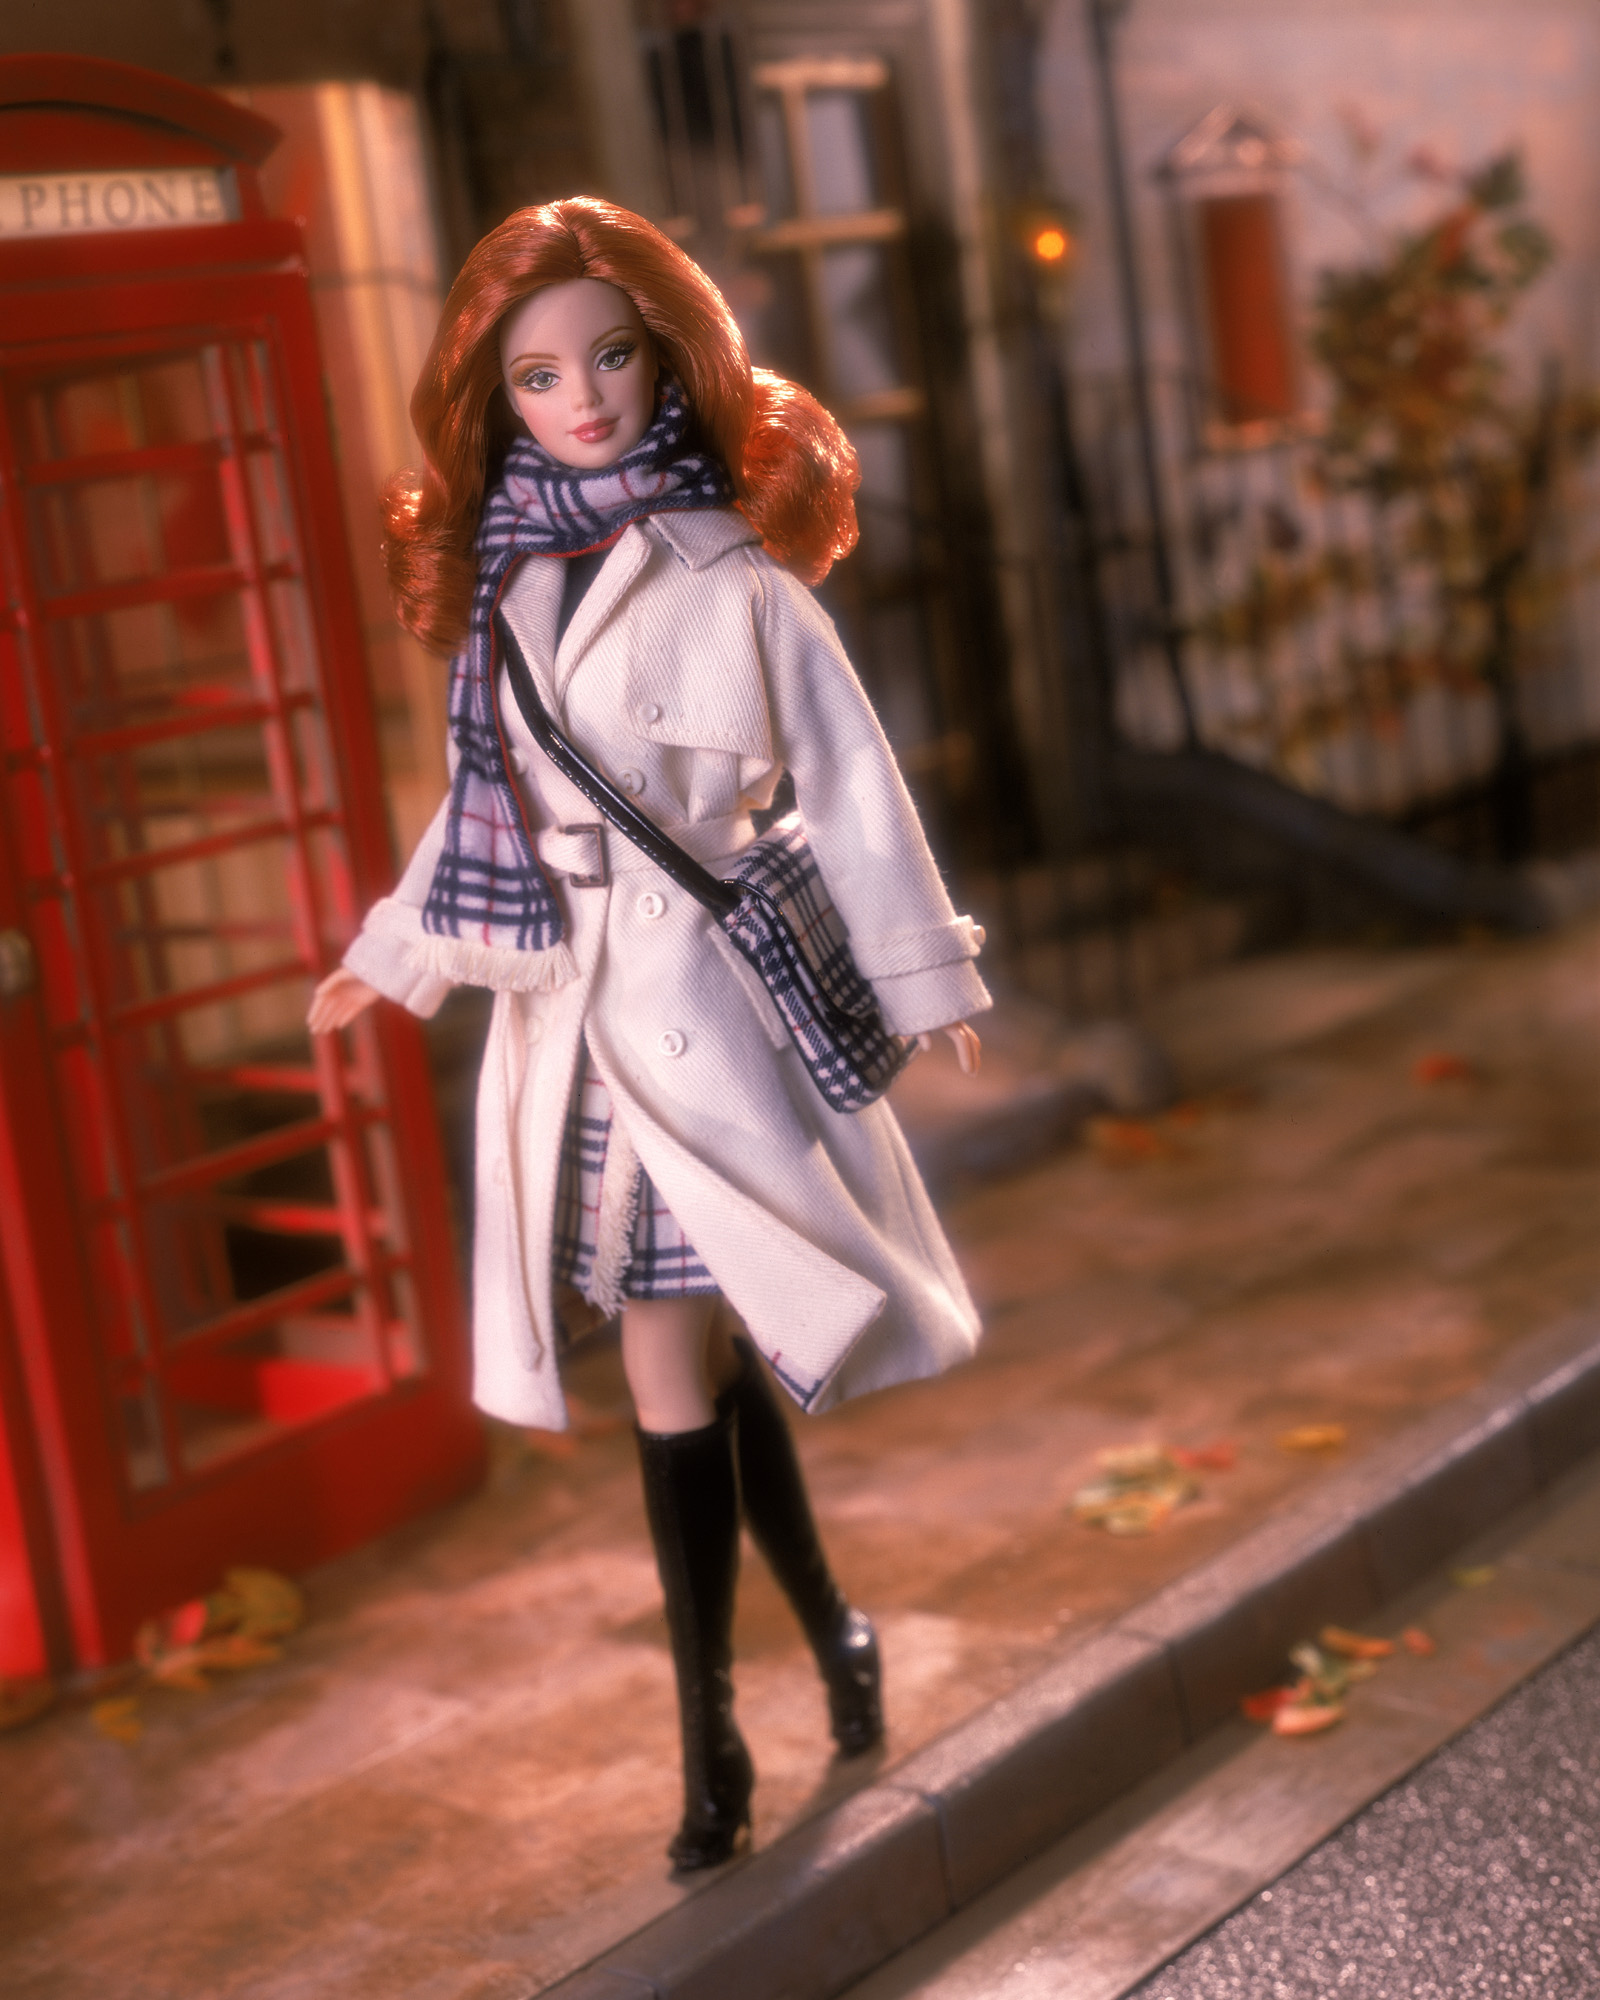 The Burberry Barbie Doll released in 2001.